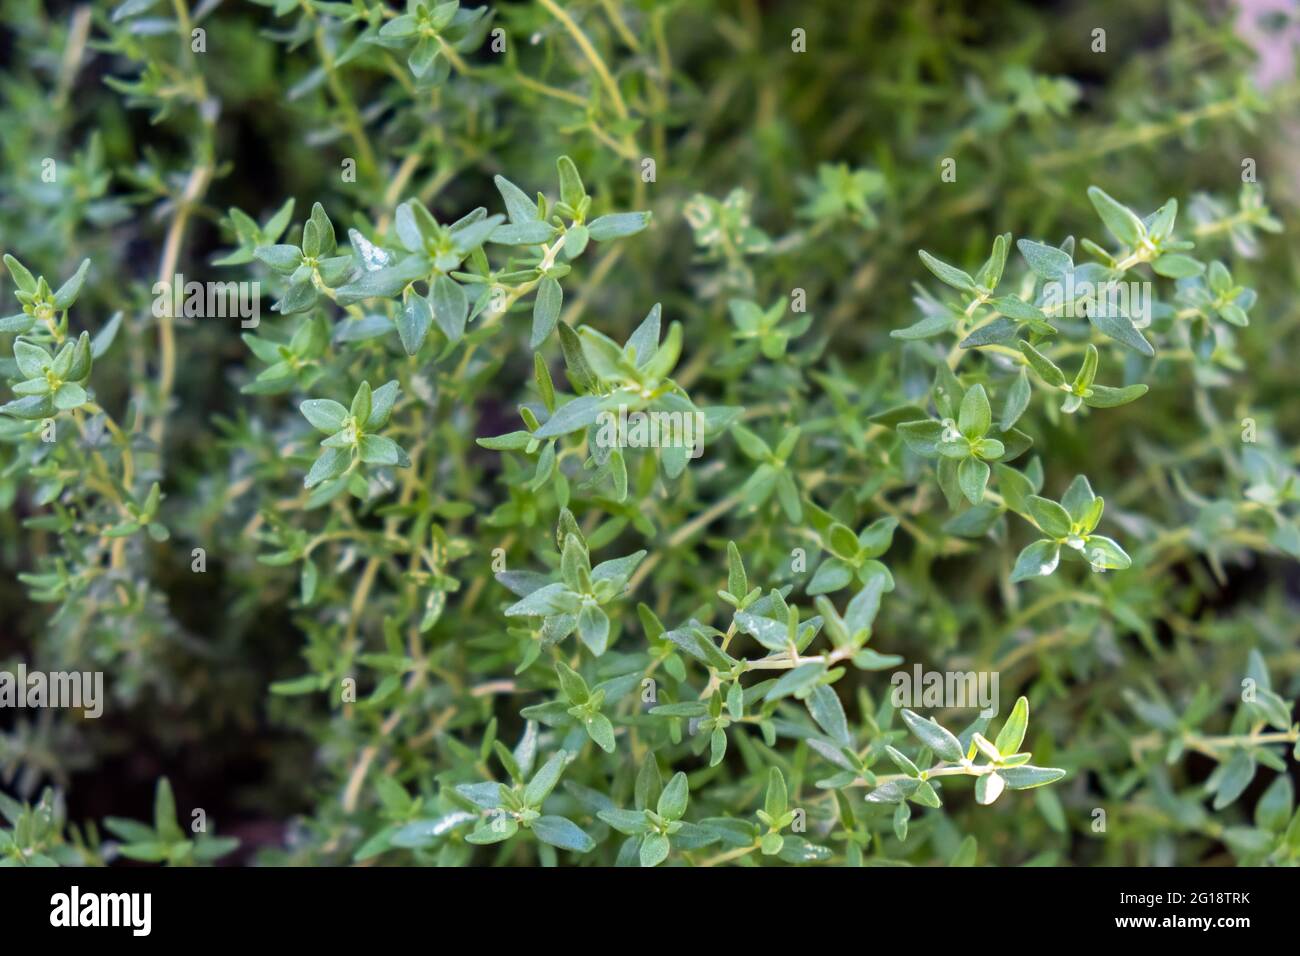 Fresh thyme background. Thymus aromatic evergreen plant healthy perennial herb, antioxidant activity. Condiment cuisine aromatherapy, bronchitis colic Stock Photo